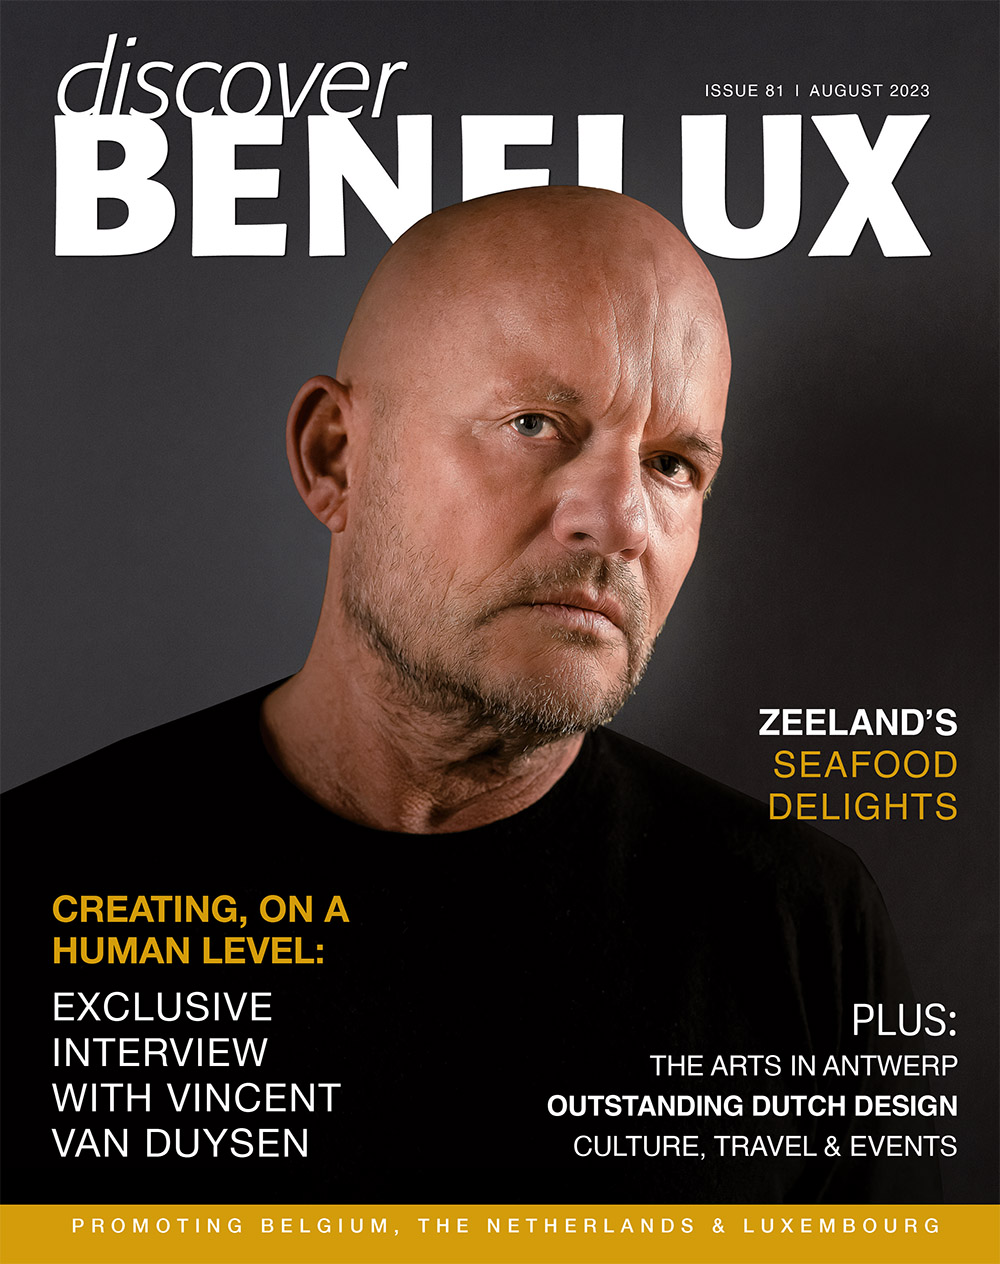 Discover Benelux, Issue 77, April 2023 by Scan Client Publishing